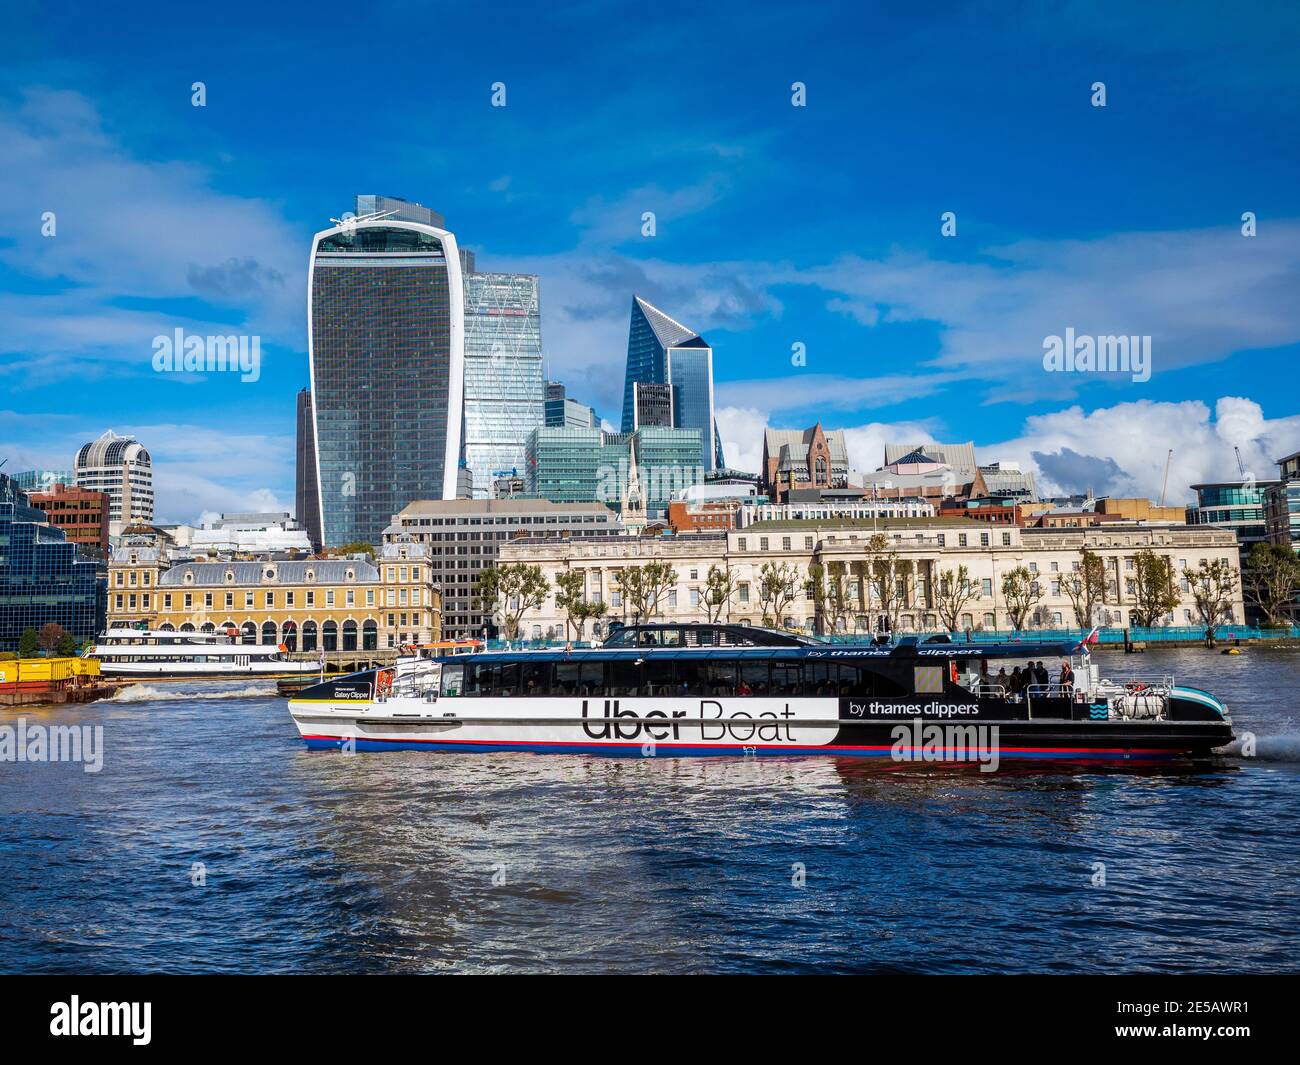 UBER Boat by Thames Clipper. City of London River view. UBER branded River Bus pass the Walkie Talkie building & the City of London Financial District Stock Photo